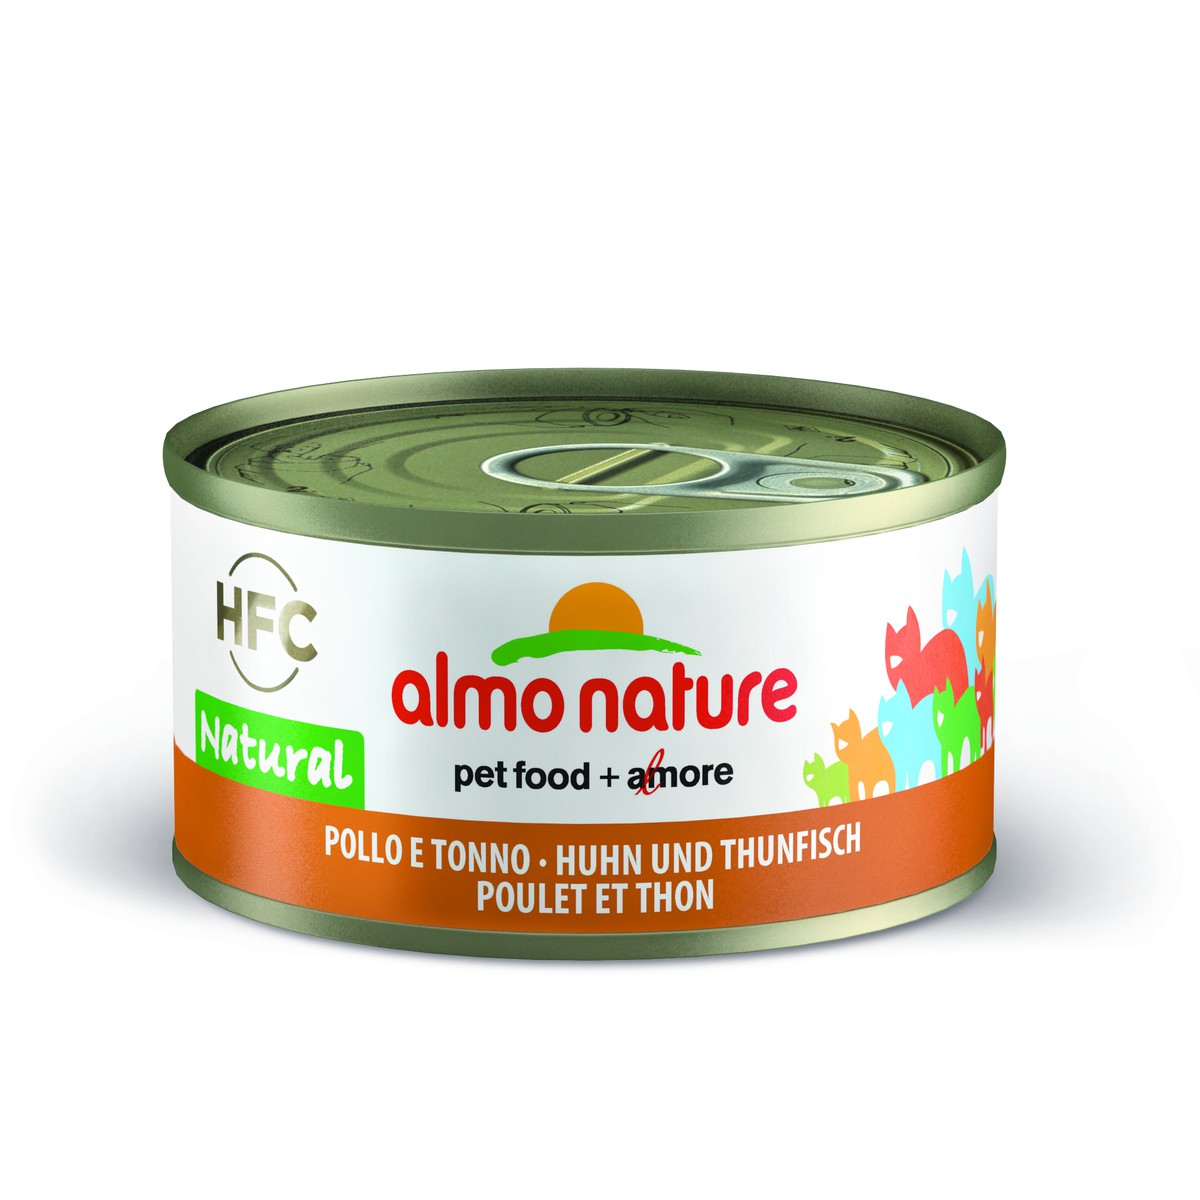 Almo nature  Almo nature  HFC CAT Natural Poulet et Thon 70g  70 g